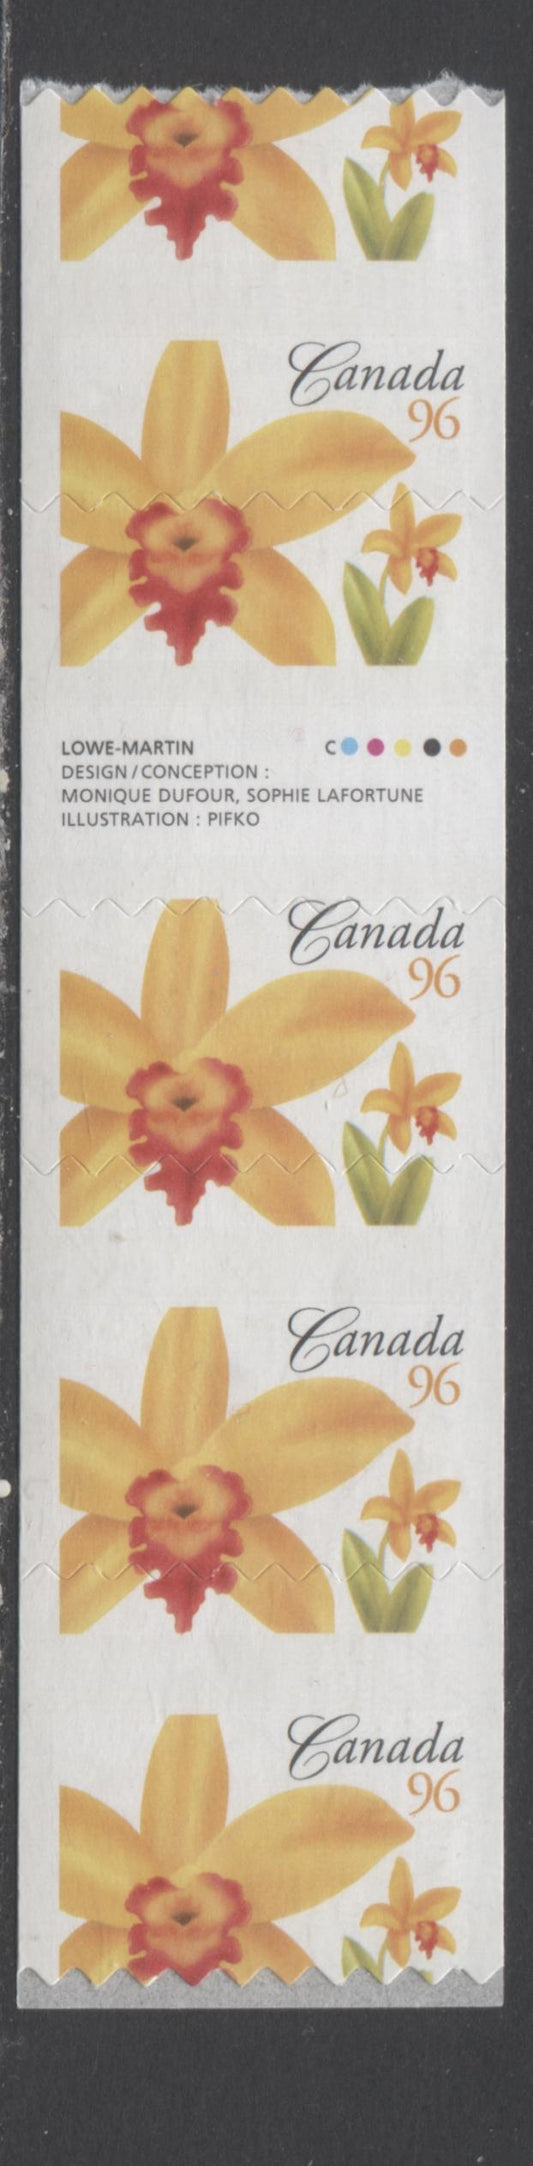 Lot 84 Canada #2245T2 96c Multicolored Fire Dancer', 2007 Flower Definitive Coils, A VFNH Gutter Strip Of 4 With Die Cutting Shifted Down 9.5mm, Resulting In All 4 Stamps Having G4dH Tagging Errors